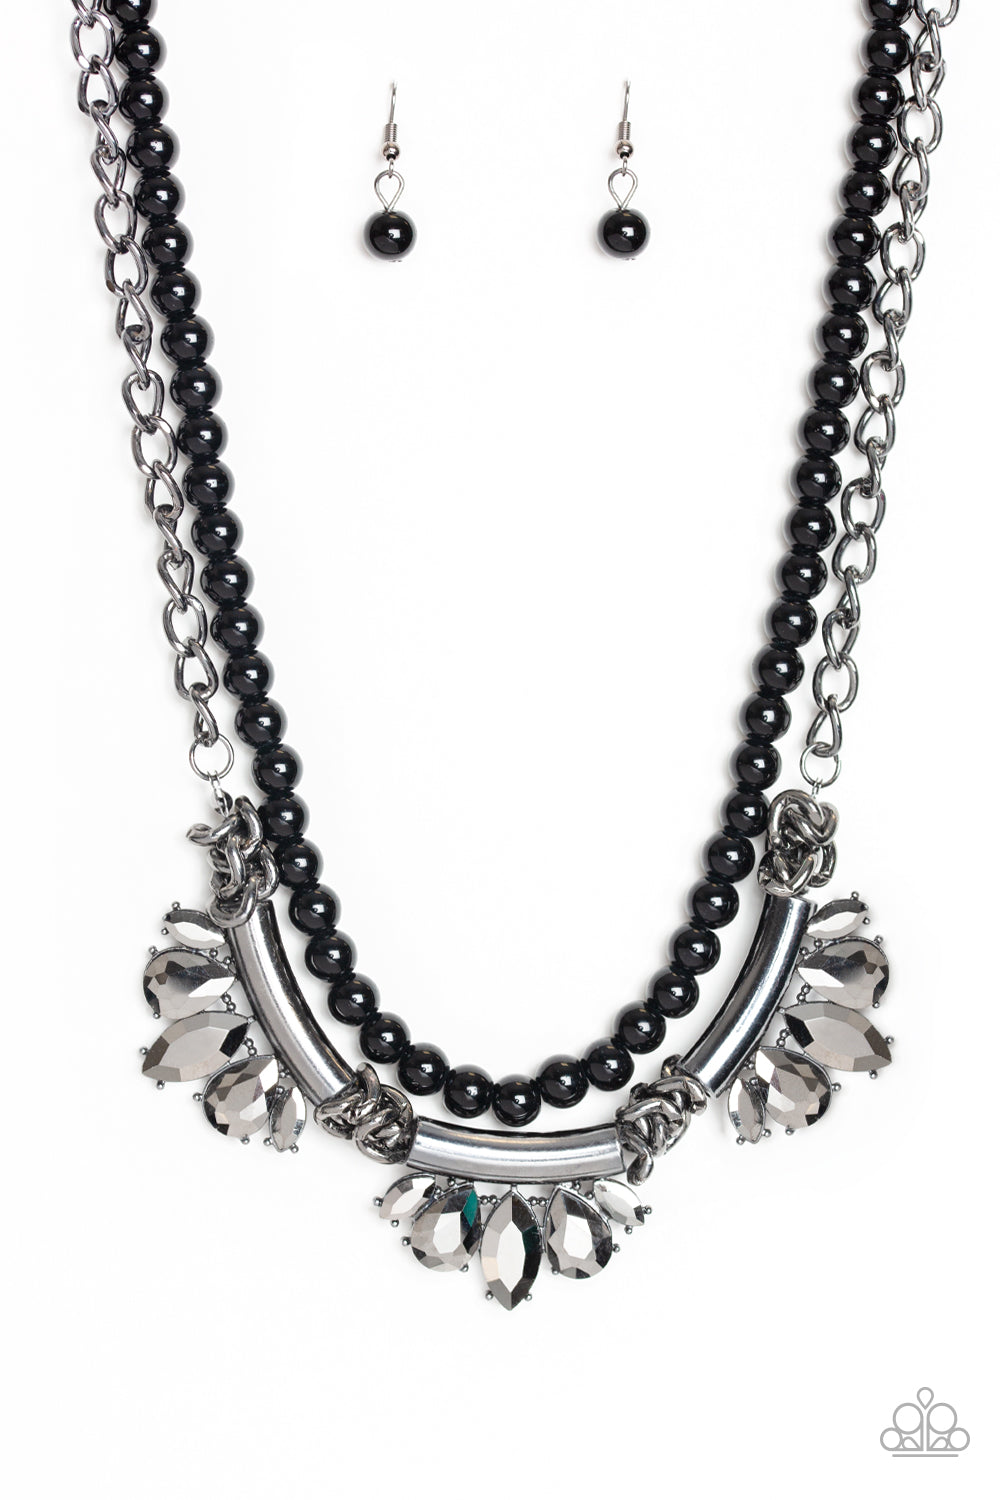 Bow Before The Queen Black Paparazzi Necklace Cashmere Pink Jewels - Cashmere Pink Jewels & Accessories, Cashmere Pink Jewels & Accessories - Paparazzi